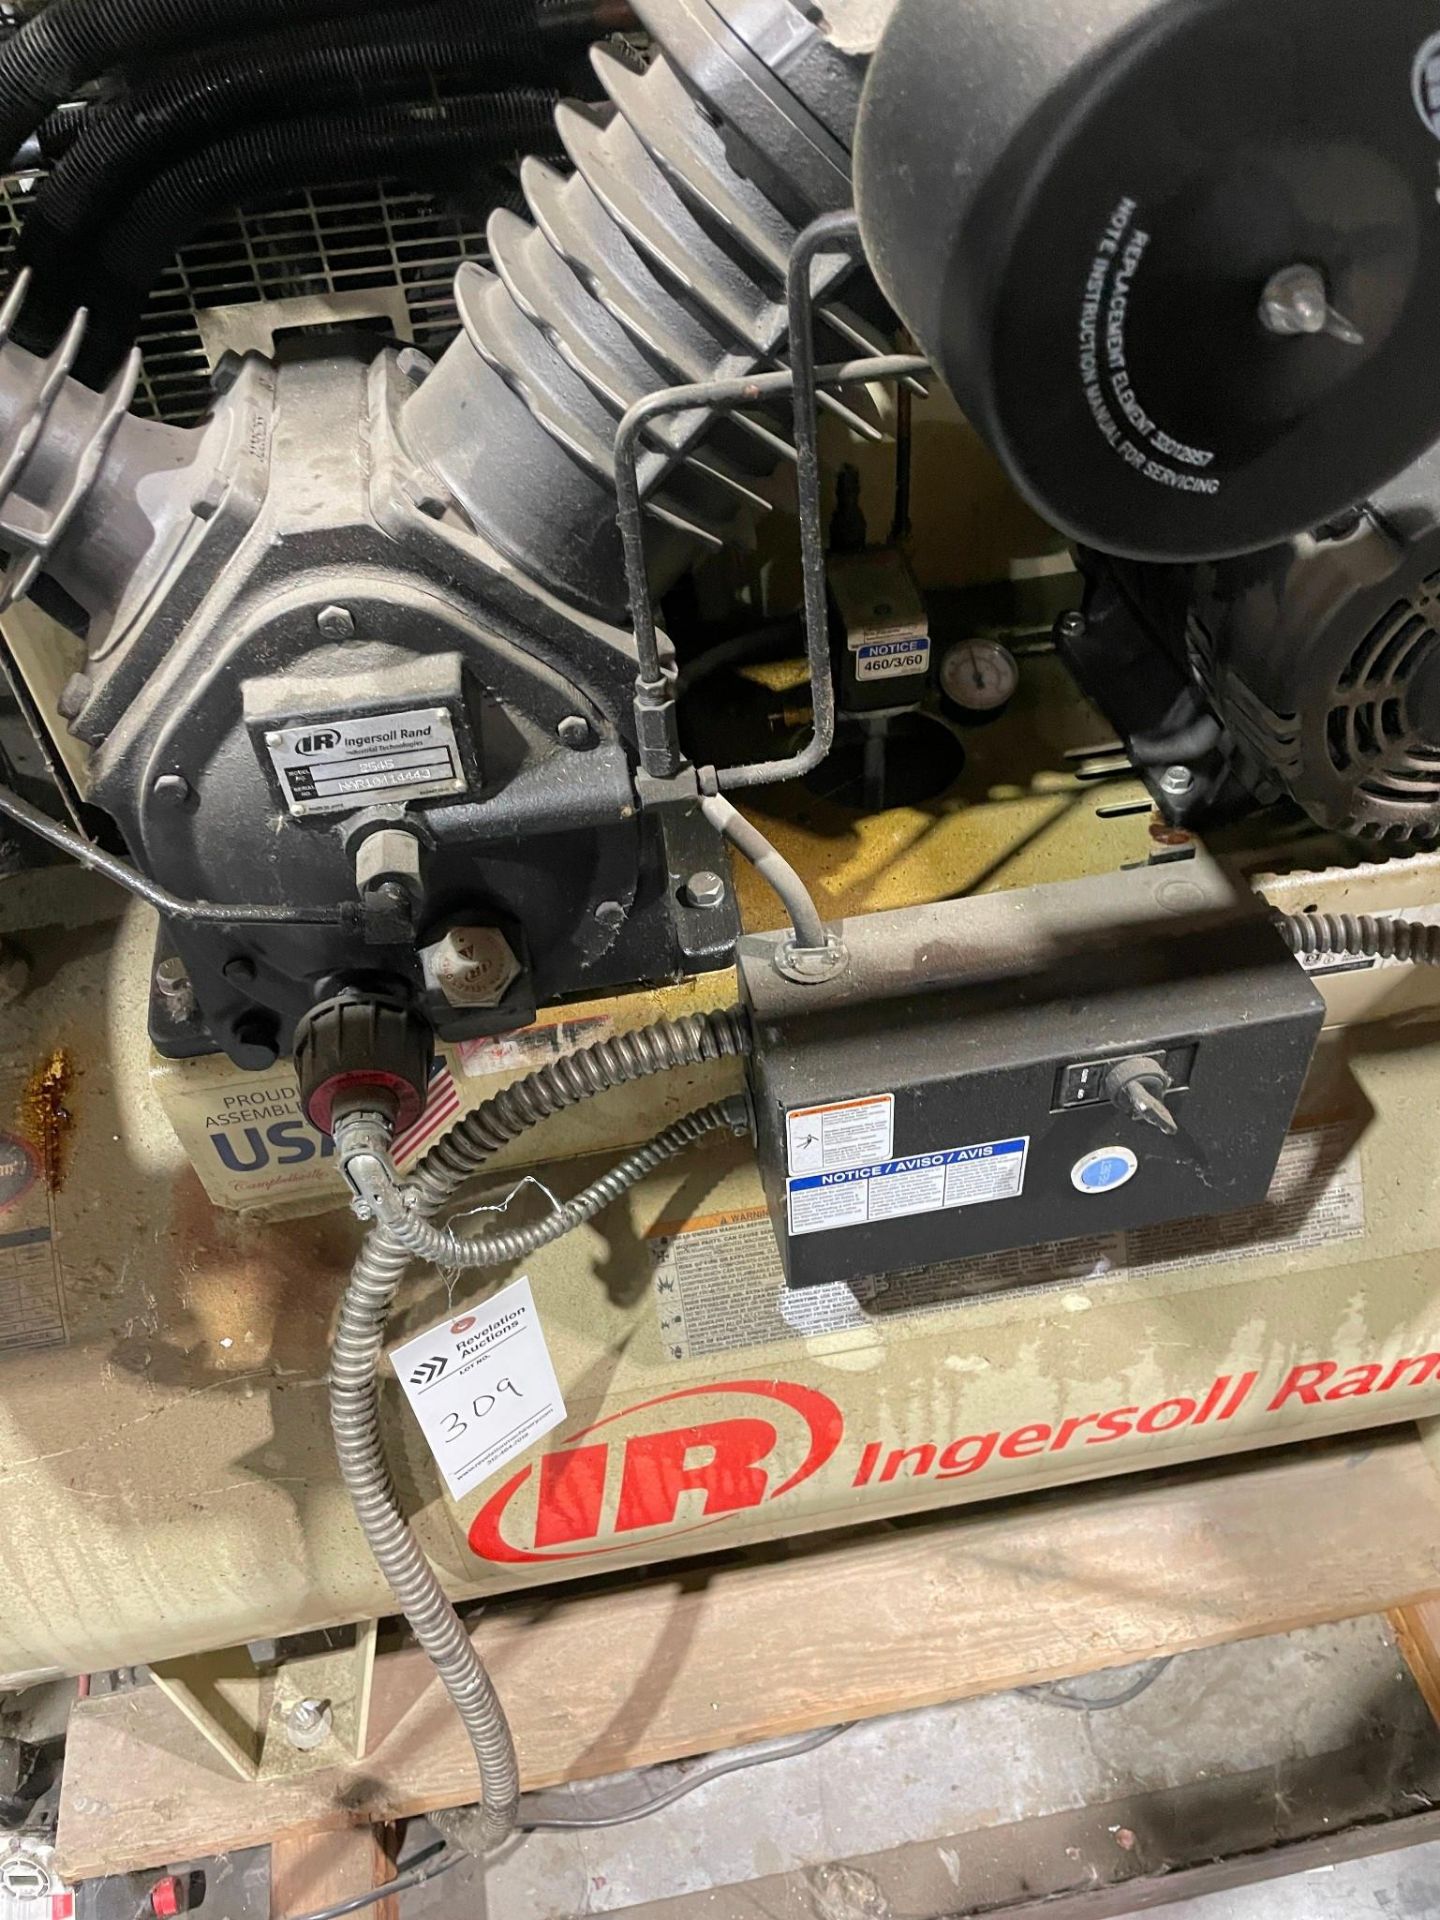 INGERSOLL RAND 2545 10 HP 120G AIR COMPRESSOR - Image 3 of 13